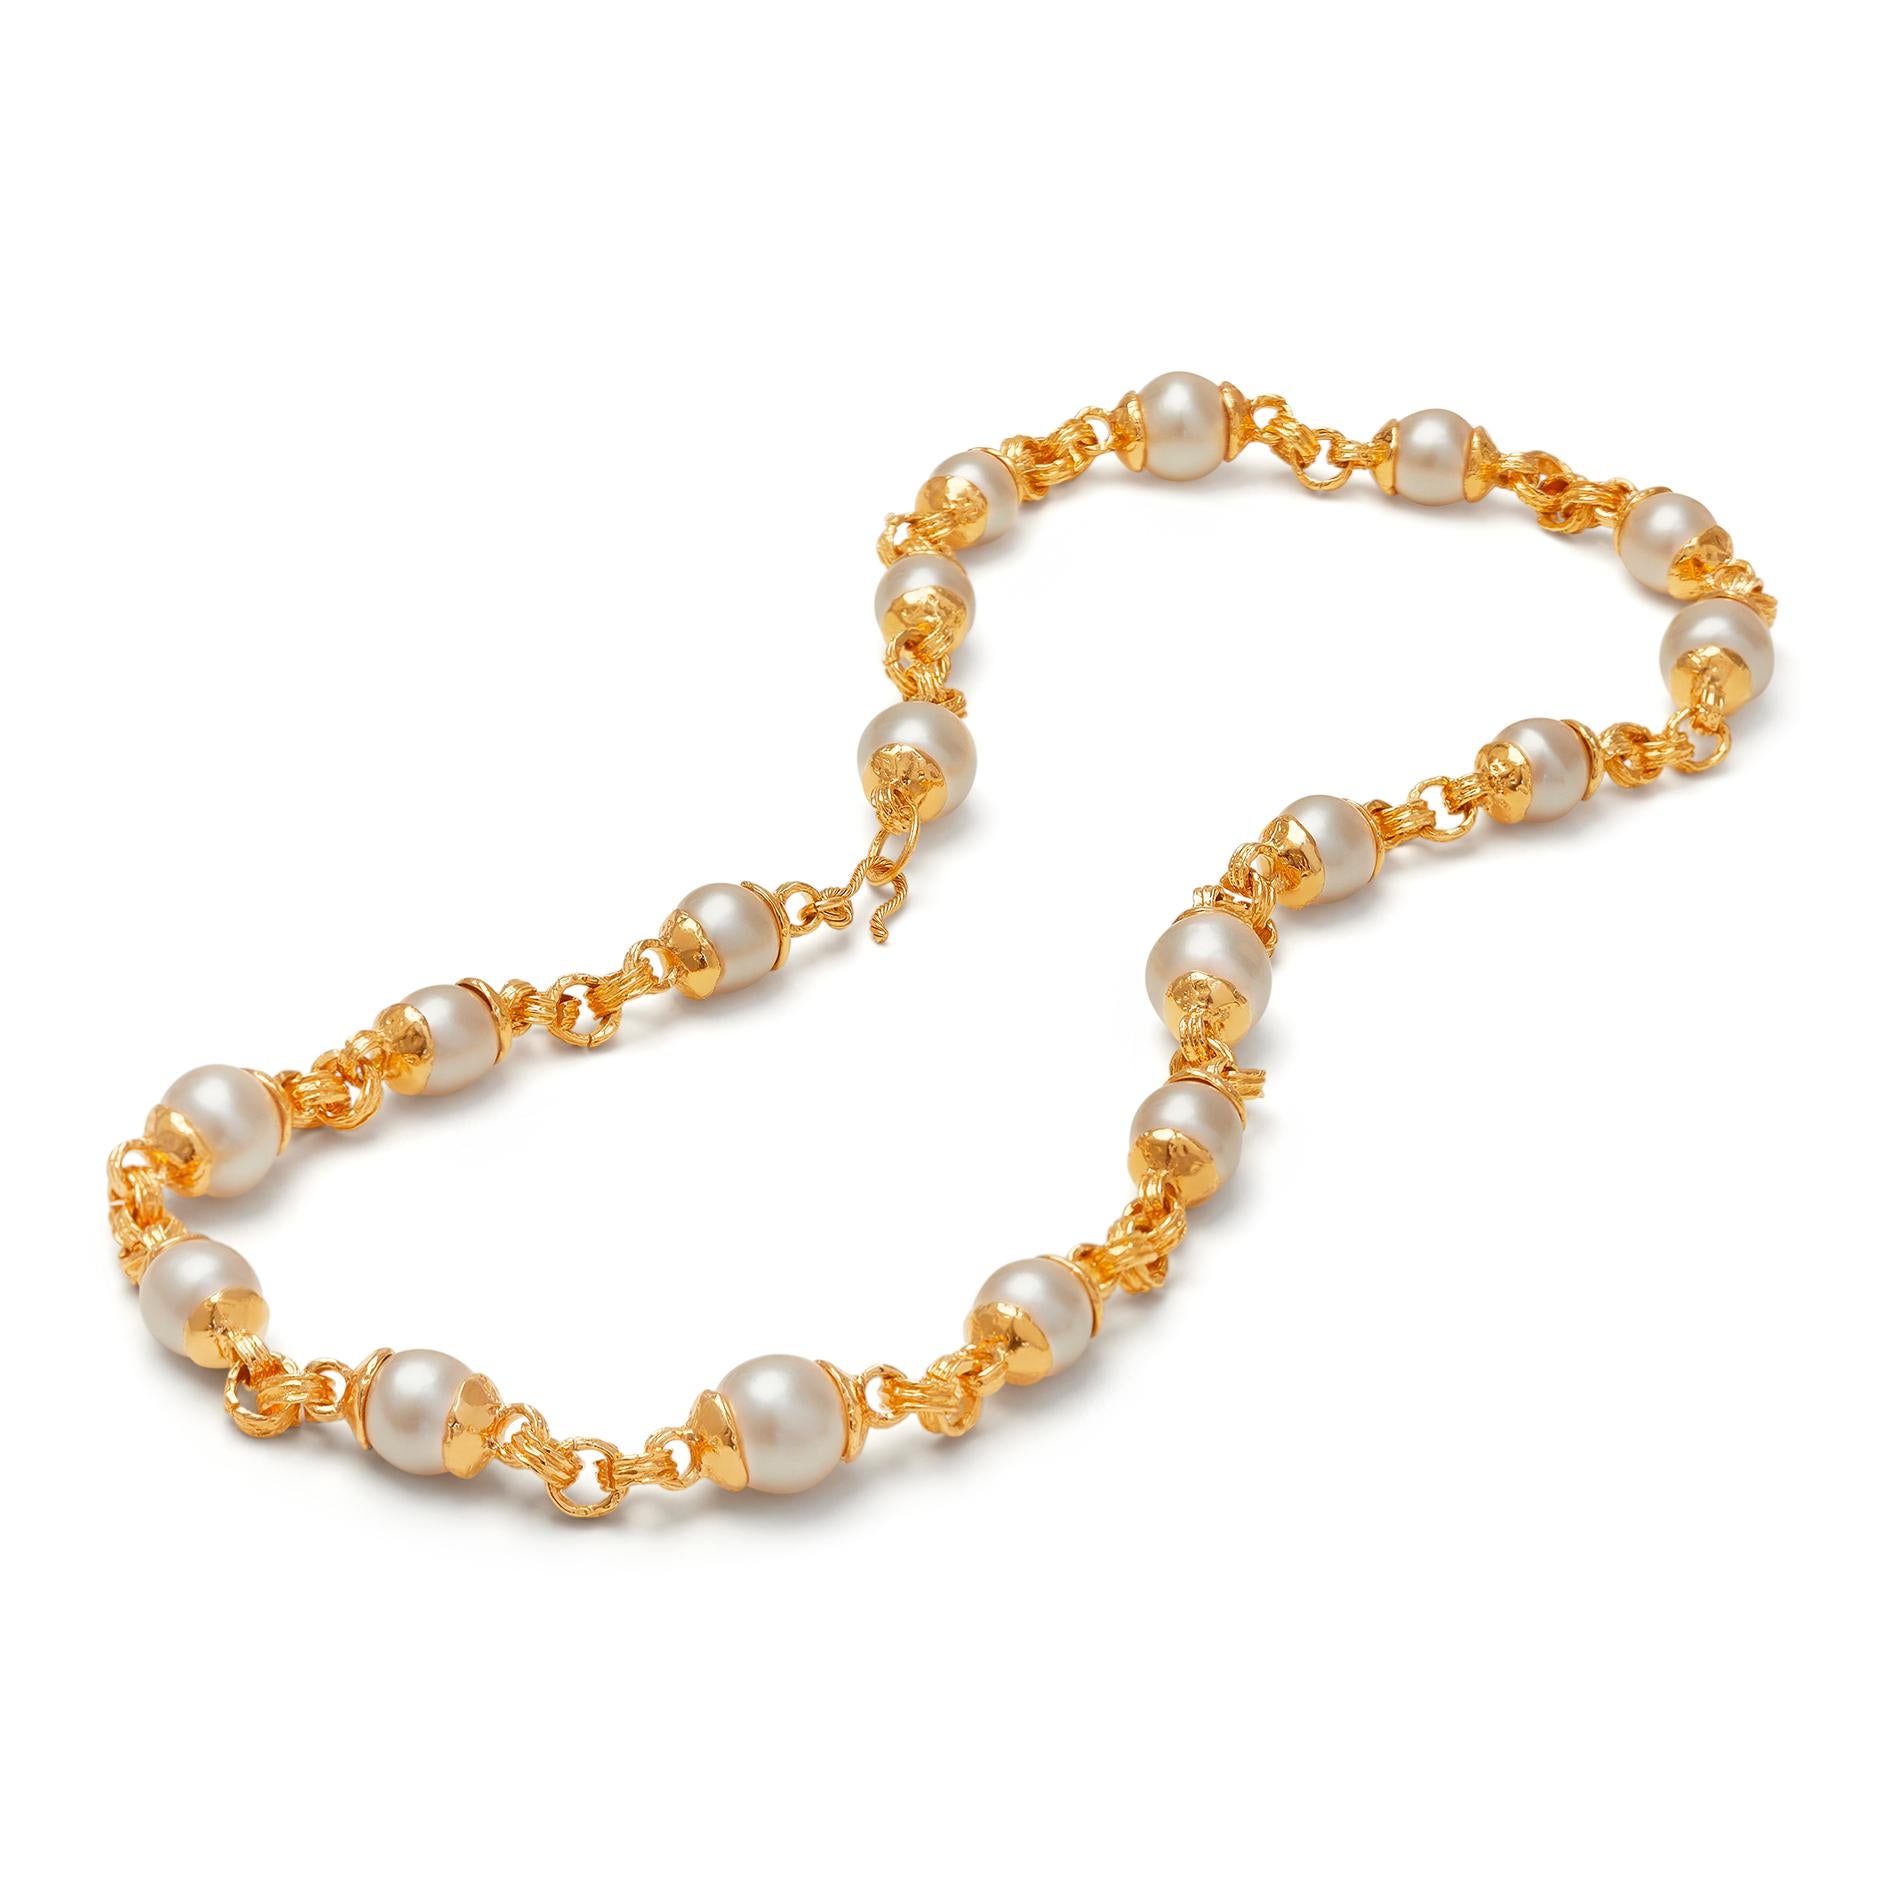 1990s Chanel large simulated pearl and gold chain link necklace. From the time Karl Lagerfeld and Victoire de Castellane were the creative directors for the House in fashion and jewellery respectively. This single strand sautoir simply slips on over